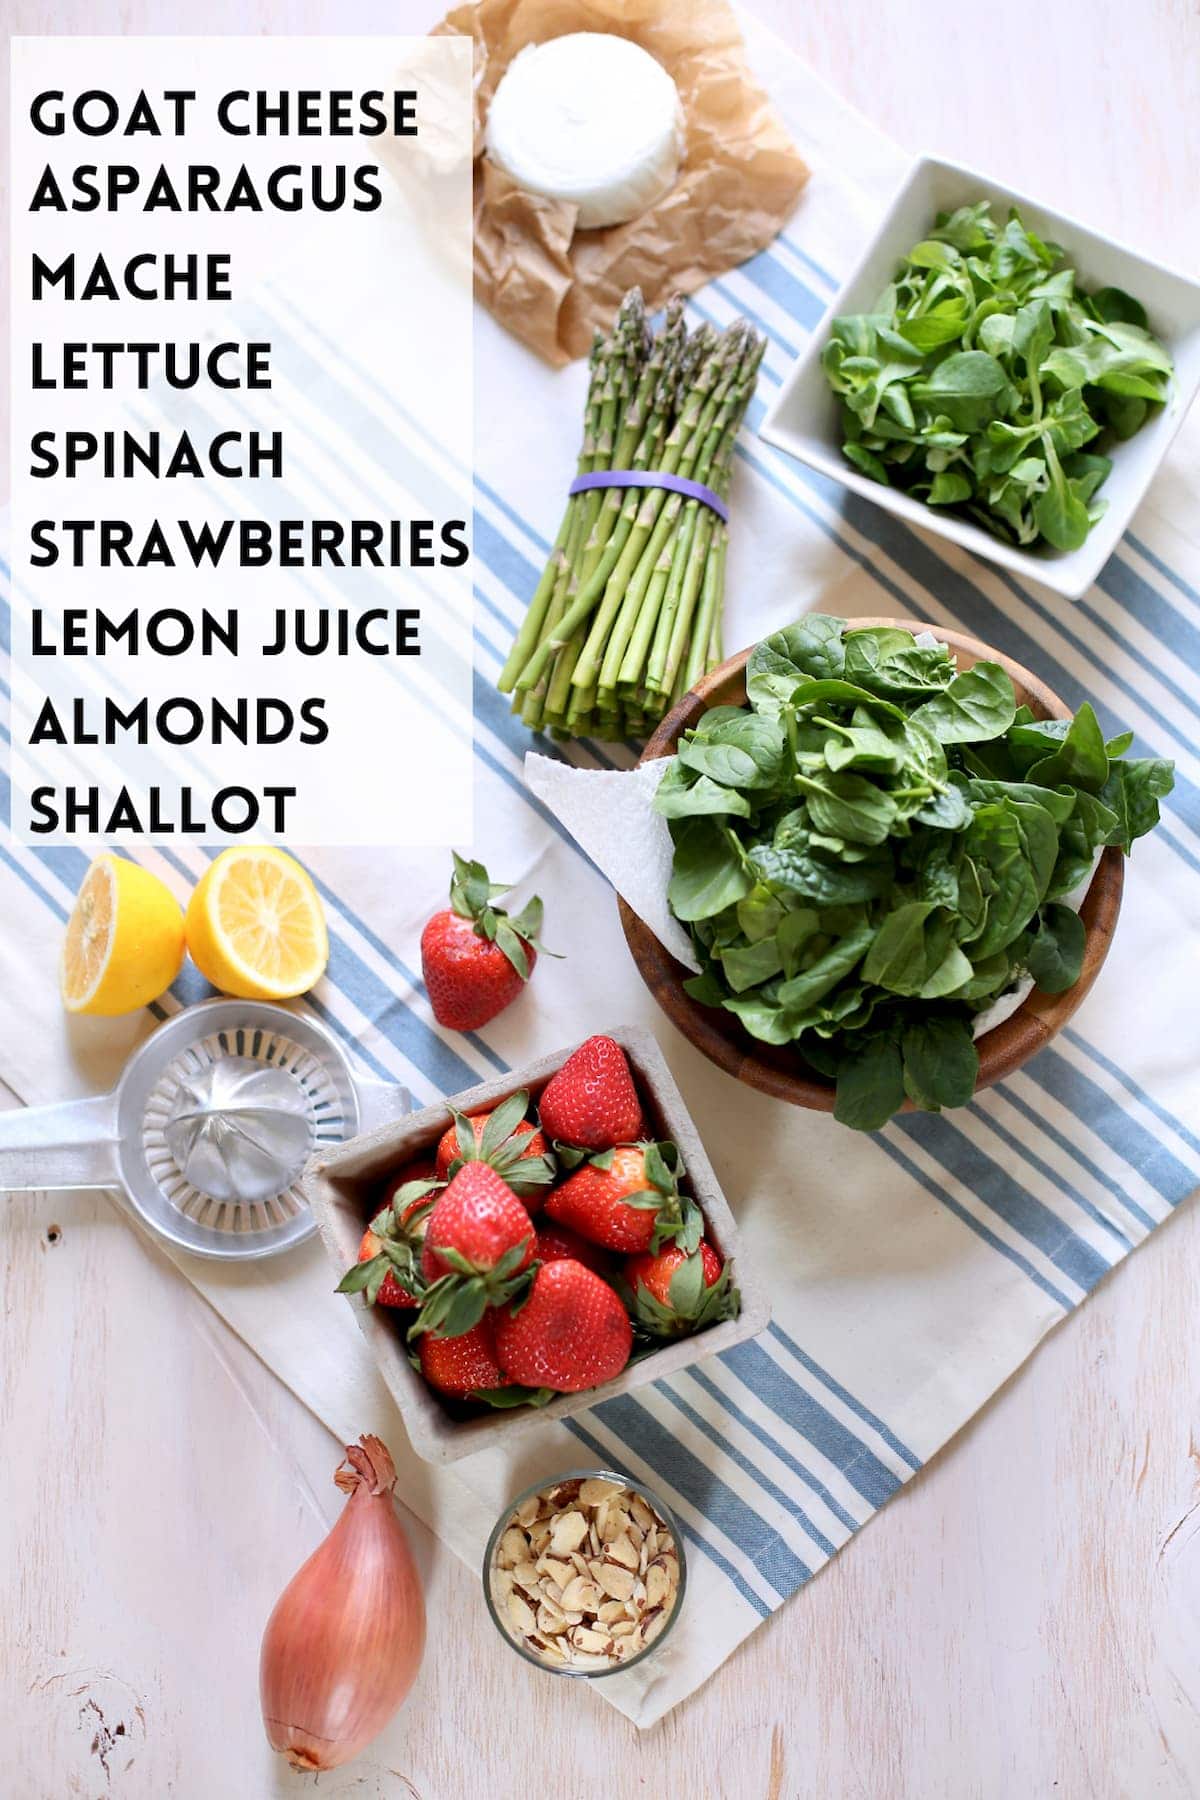 a list of ingredients and pictures of them, lettuce, strawberries, shallot, lemon, almonds, asparagus.